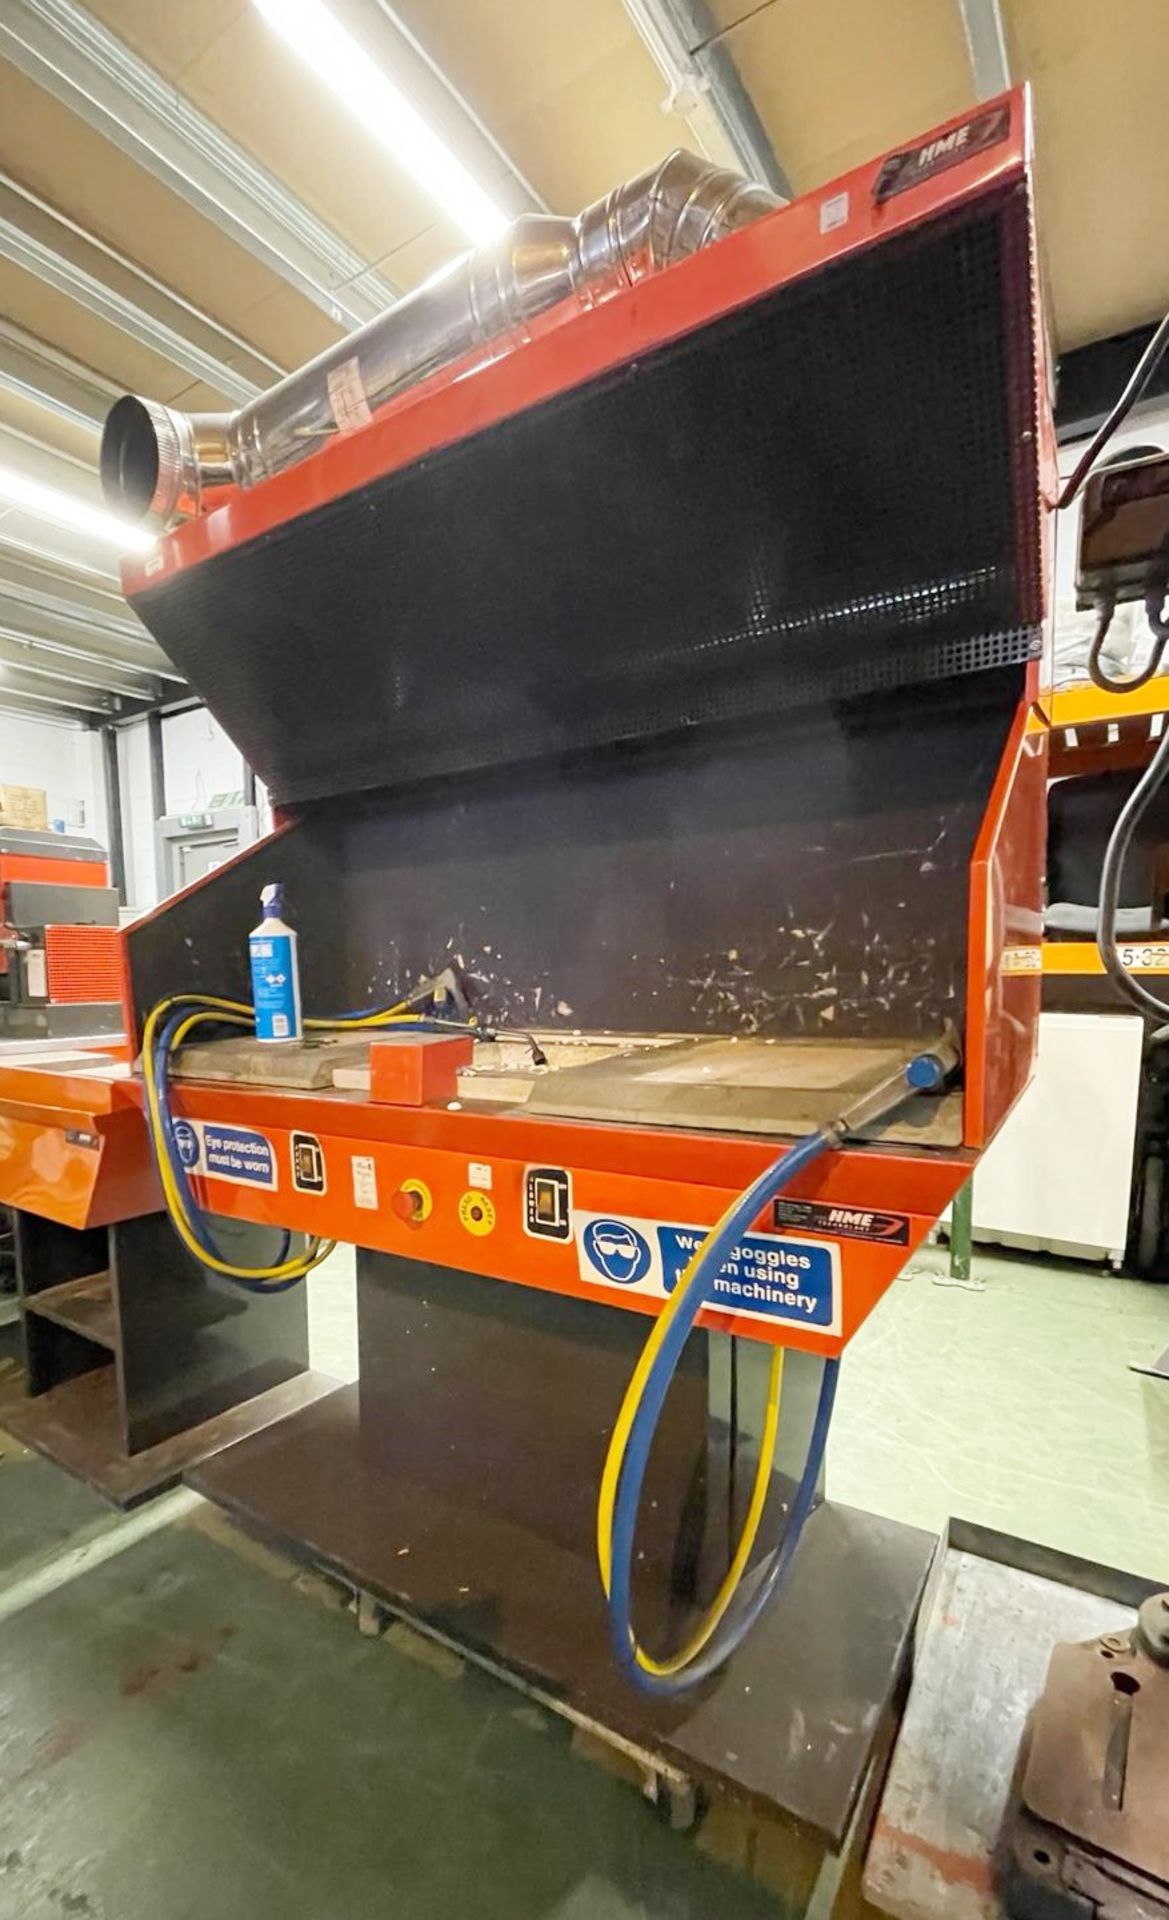 1 x Double Brazing Hearth and Alumina Chip Forge - Treatment Unit for Joining of Metal - RRP £7,800 - Image 9 of 12